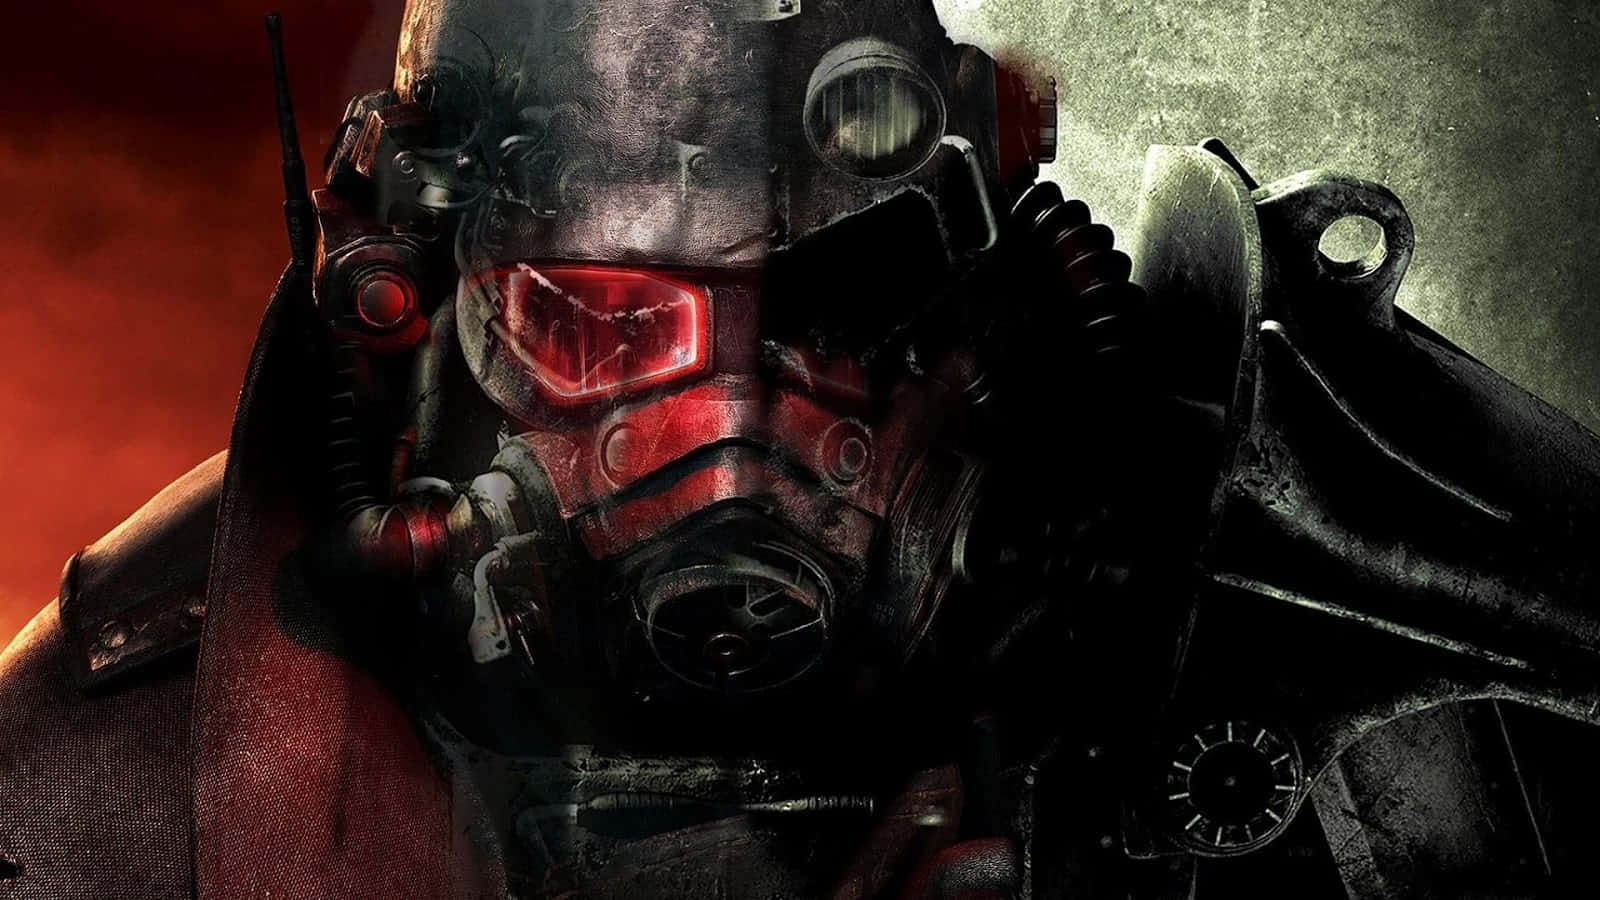 Fallout Brotherhood Of Steel Power Armor against an apocalyptic backdrop Wallpaper